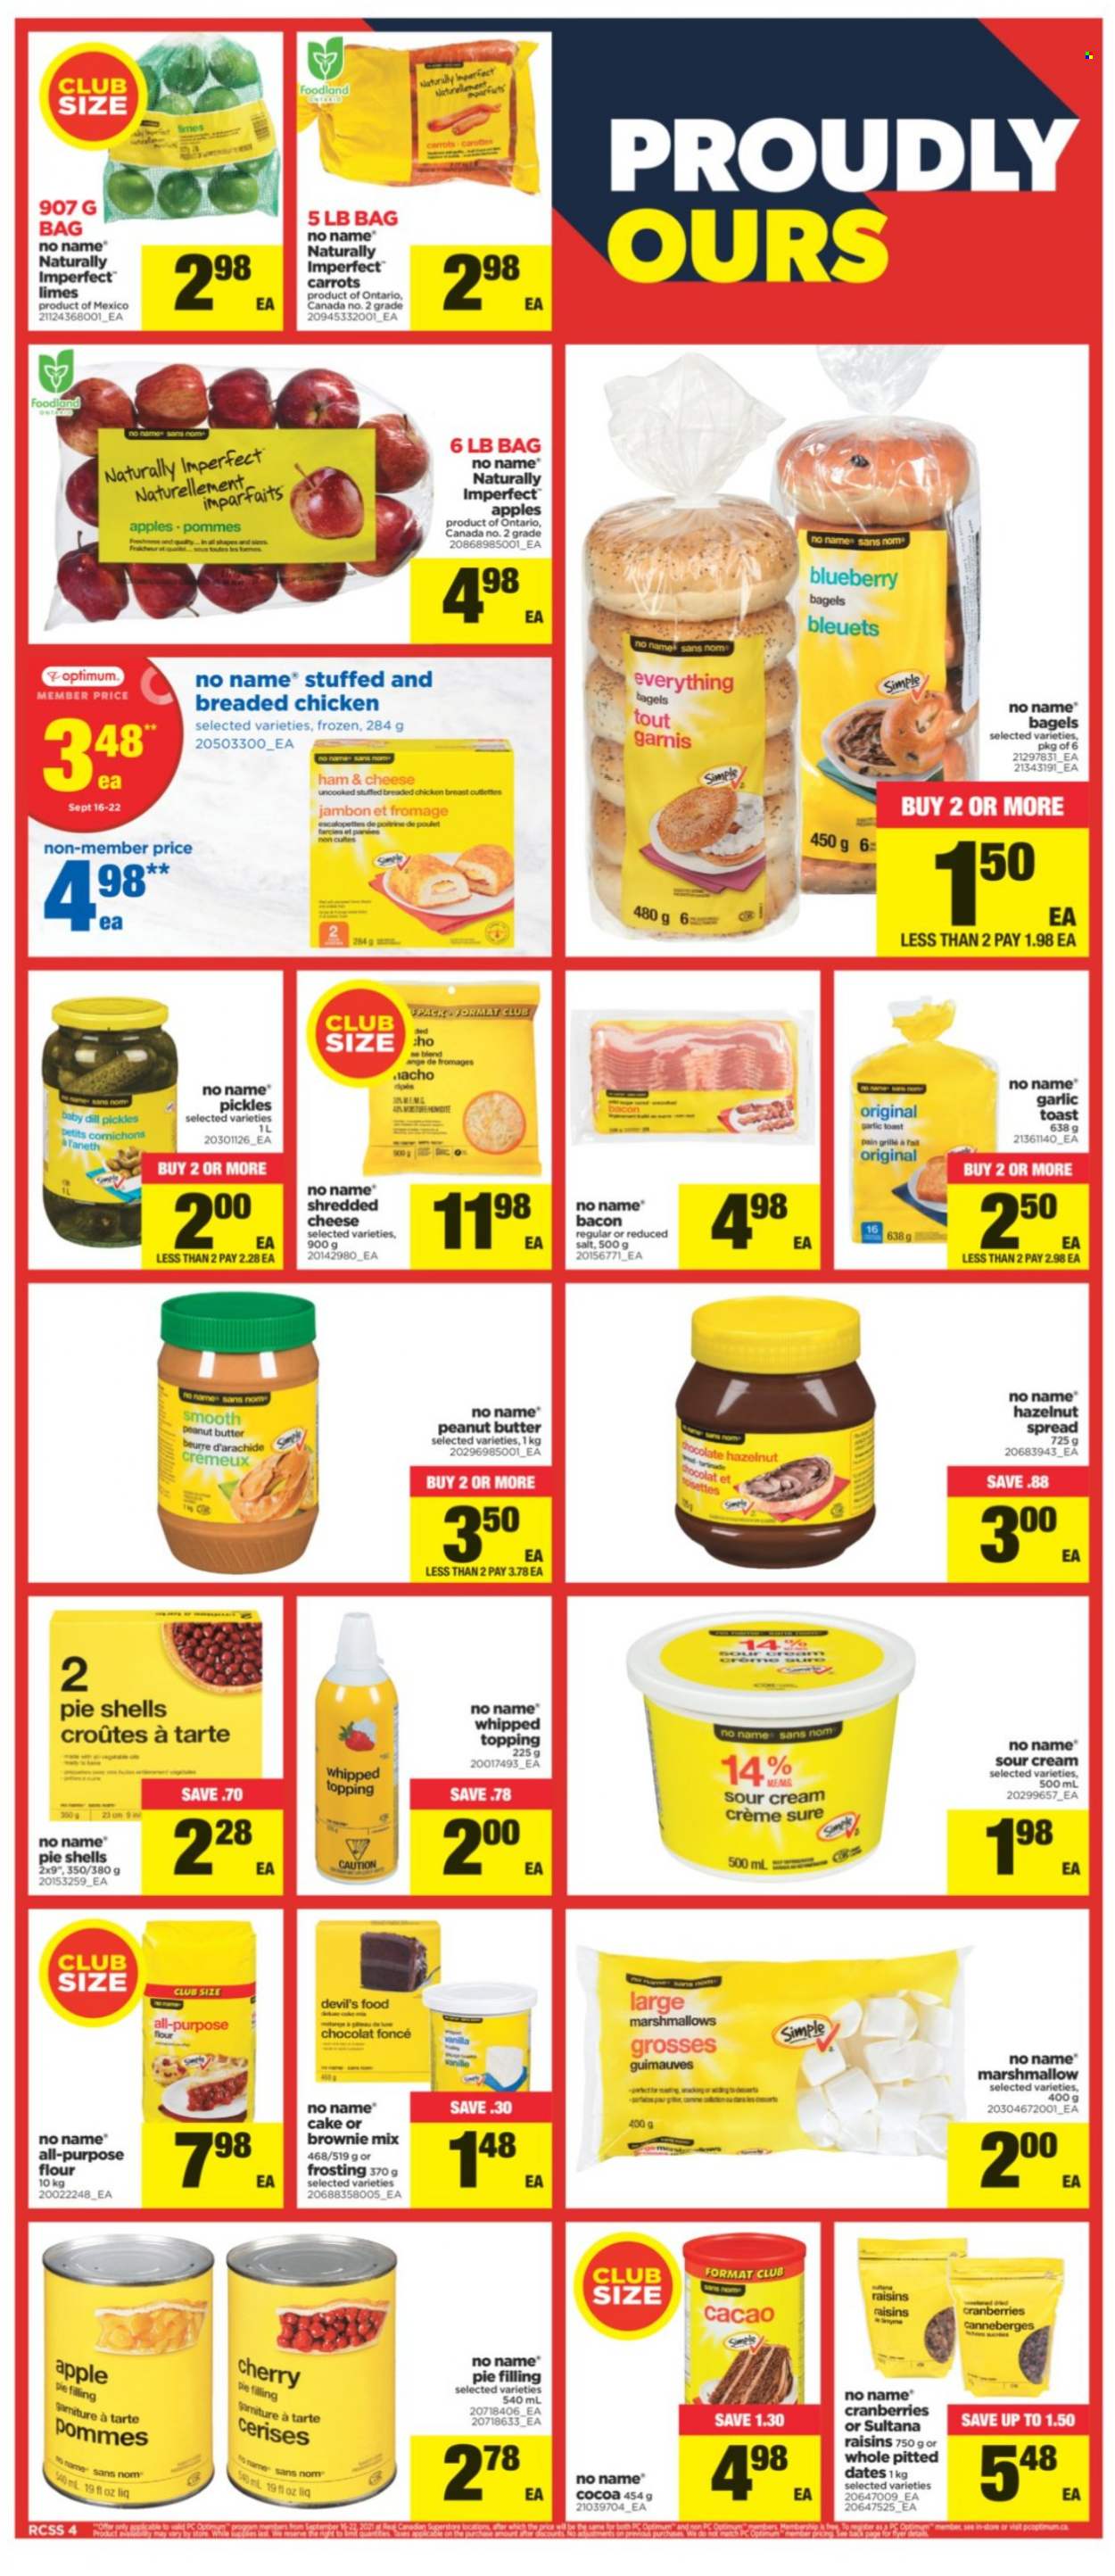 thumbnail - Real Canadian Superstore Flyer - September 16, 2021 - September 22, 2021 - Sales products - bagels, cake, brownie mix, carrots, limes, No Name, fried chicken, bacon, ham, shredded cheese, sour cream, marshmallows, apple pie filling, cocoa, flour, frosting, pie filling, topping, cranberries, pickles, dill, hazelnut spread, dried fruit, dried dates, chicken, Sure, Optimum, raisins. Page 4.